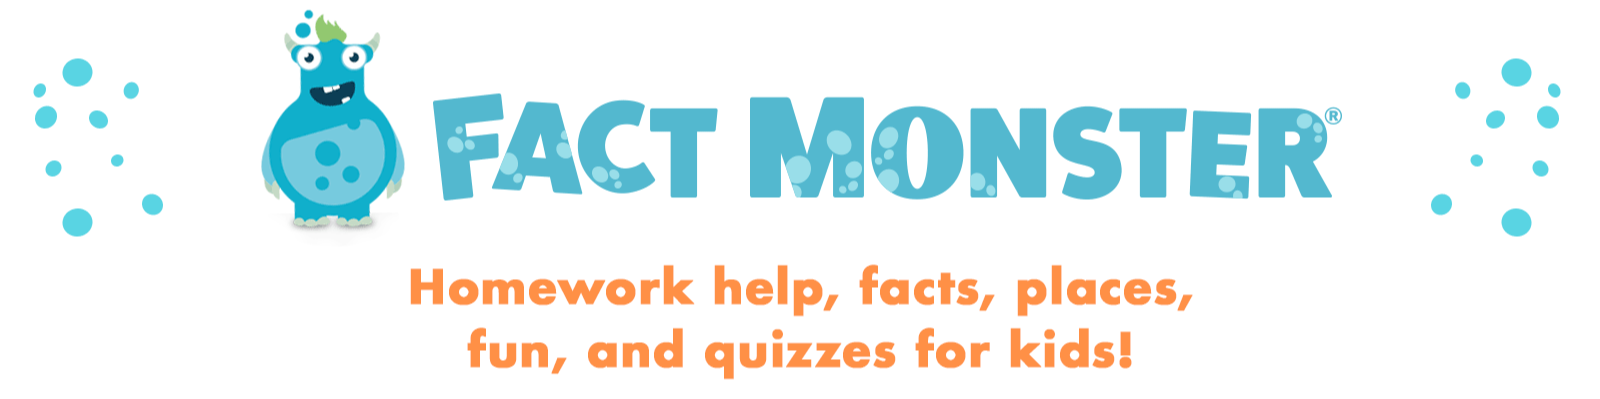 "fact monster" | home help, facts, places, fun, and quizzes for kids!